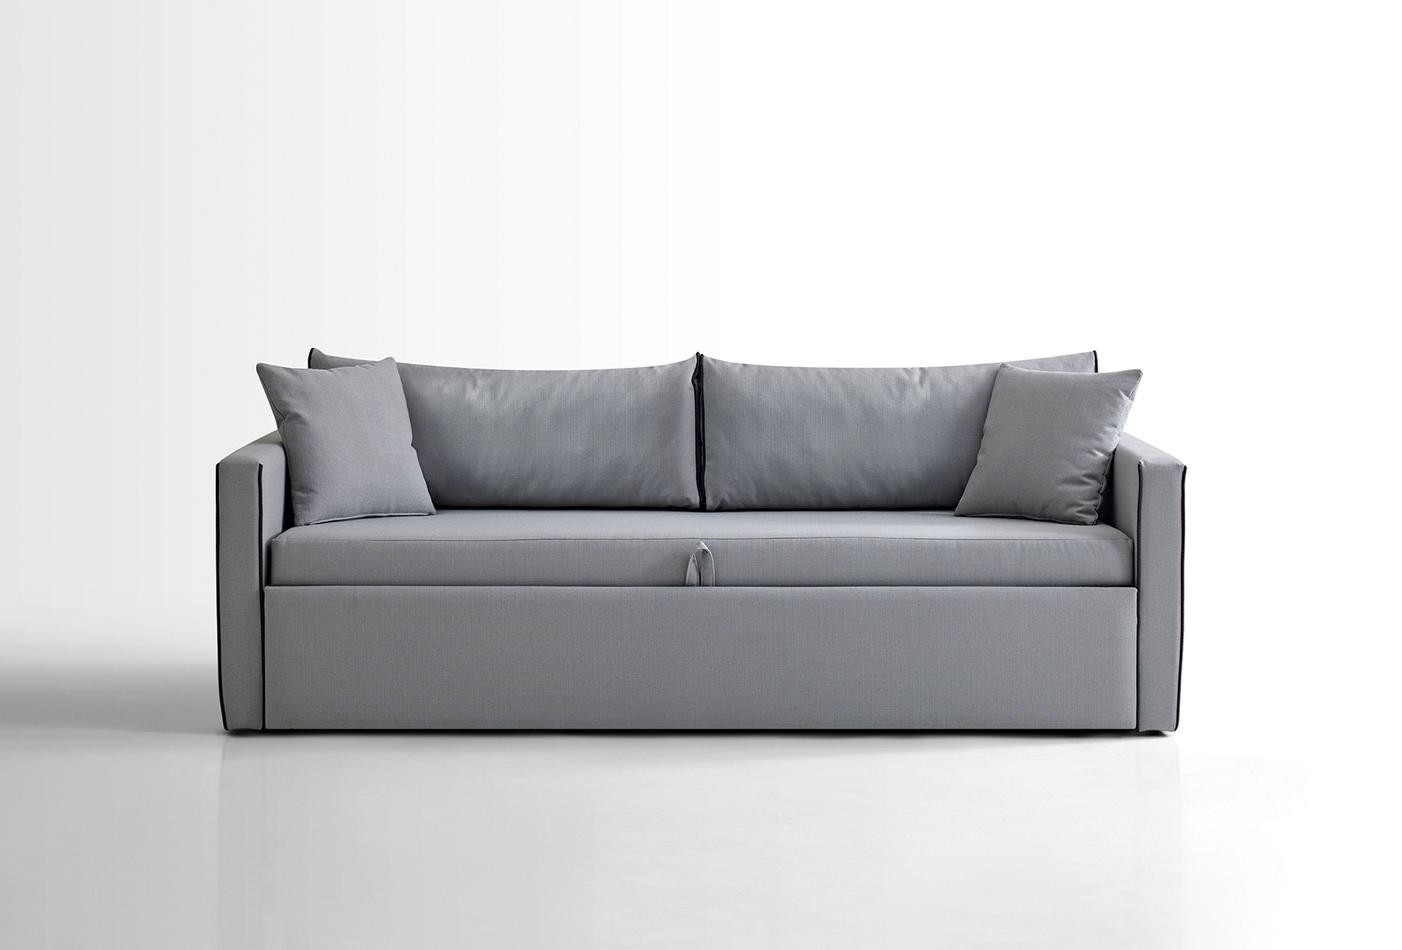 Enza Home Daybed Comfort, Daybed, 80x200 cm